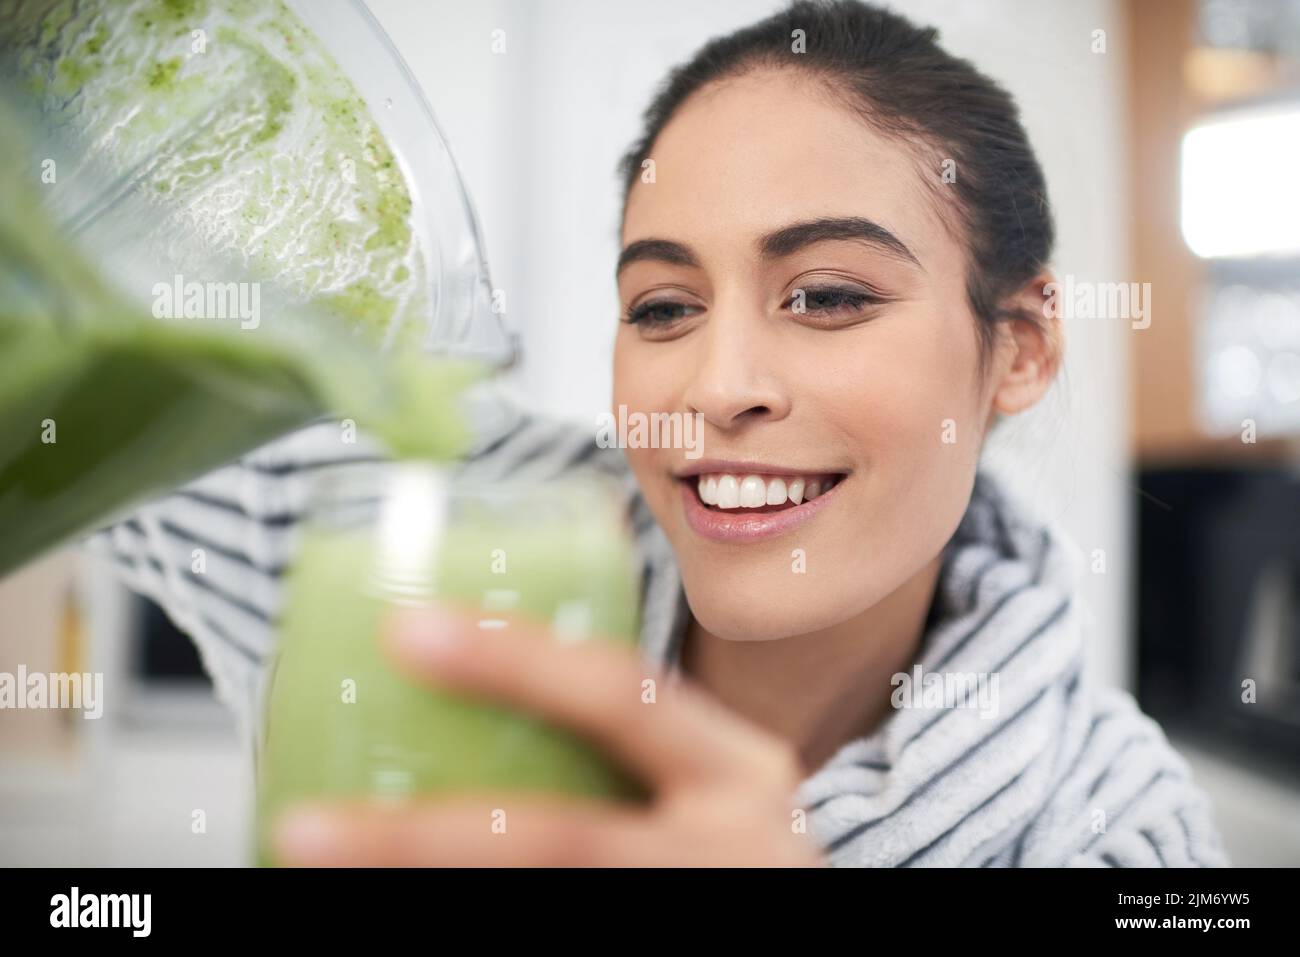 This will make me feel energised and ready for the day. a woman drinking a smoothie at home. Stock Photo